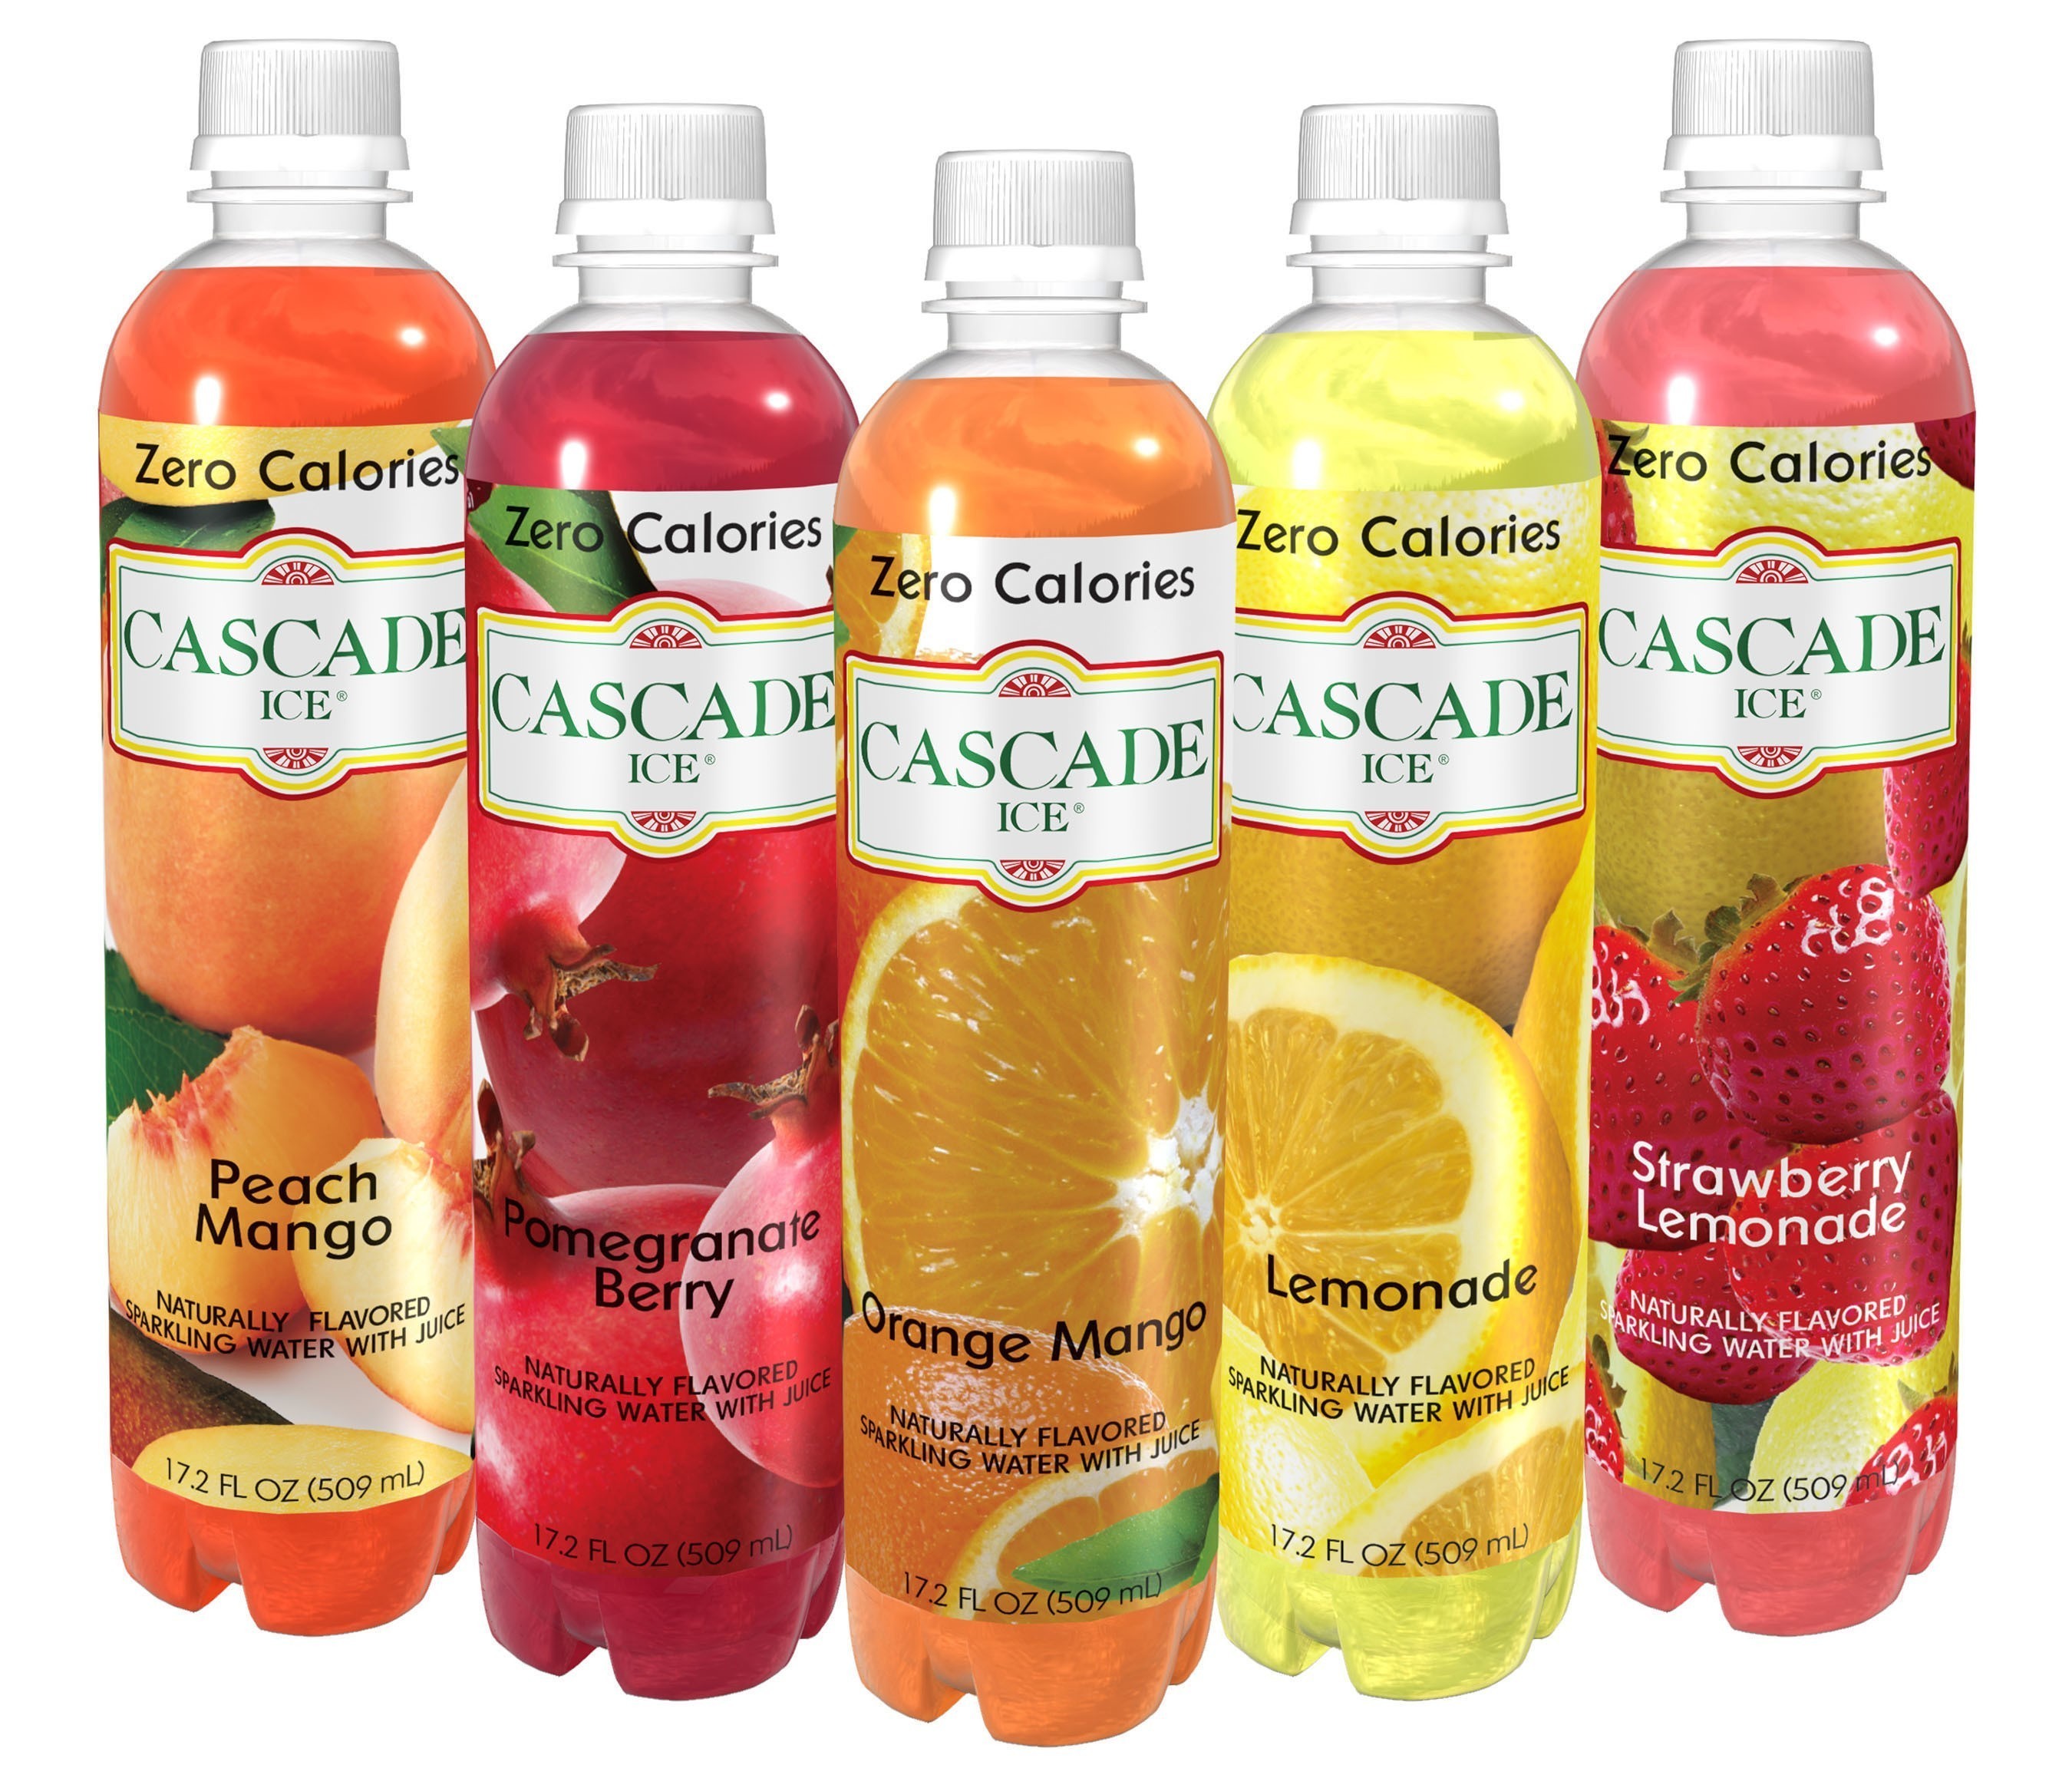 Zero-Calorie Sparkling Water, Cascade Ice, Encourages Healthy And ...